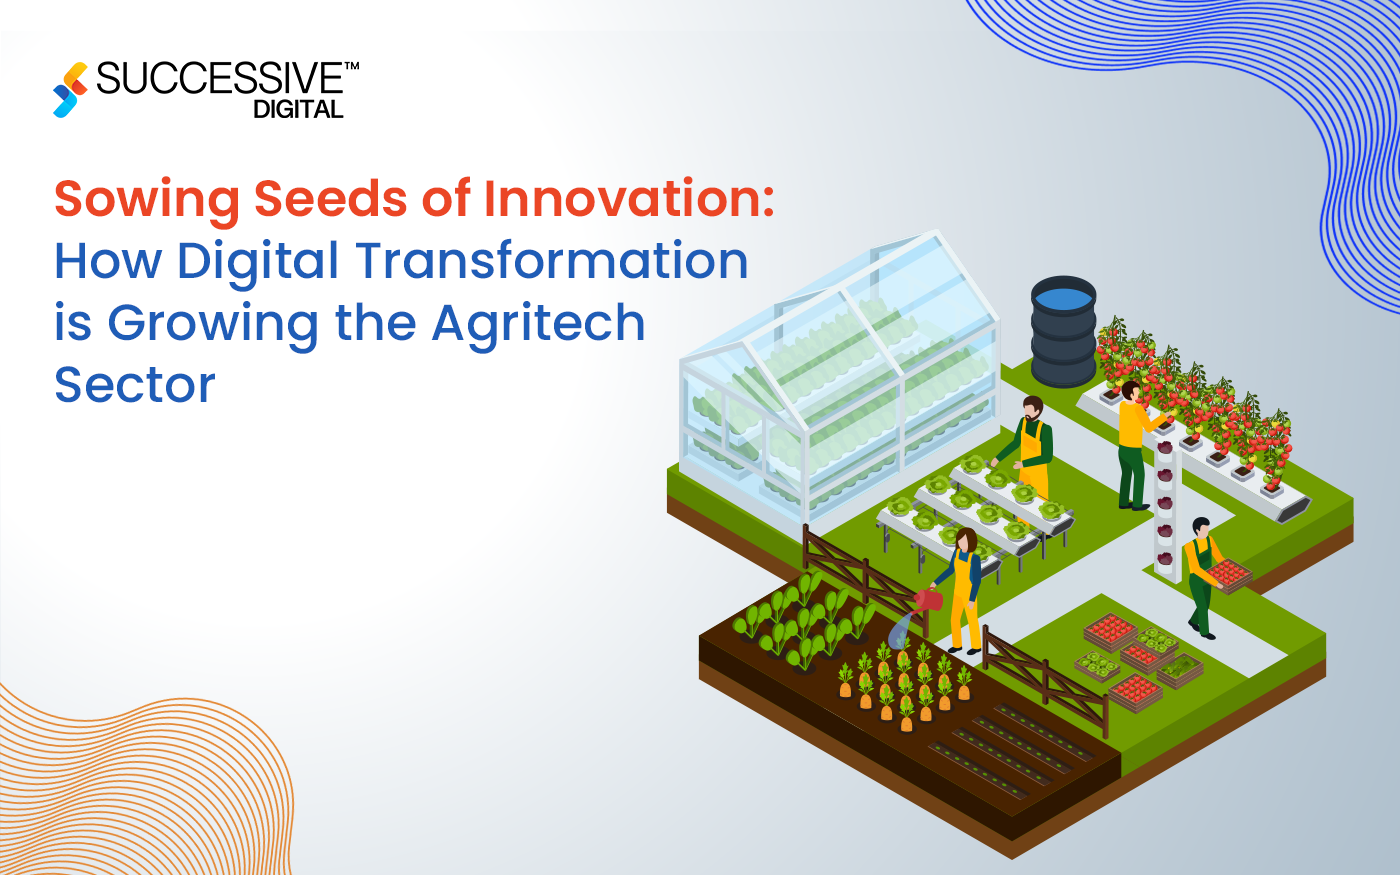 How Digital Transformation is Growing the Agritech Sector: Sowing Seeds of Innovation